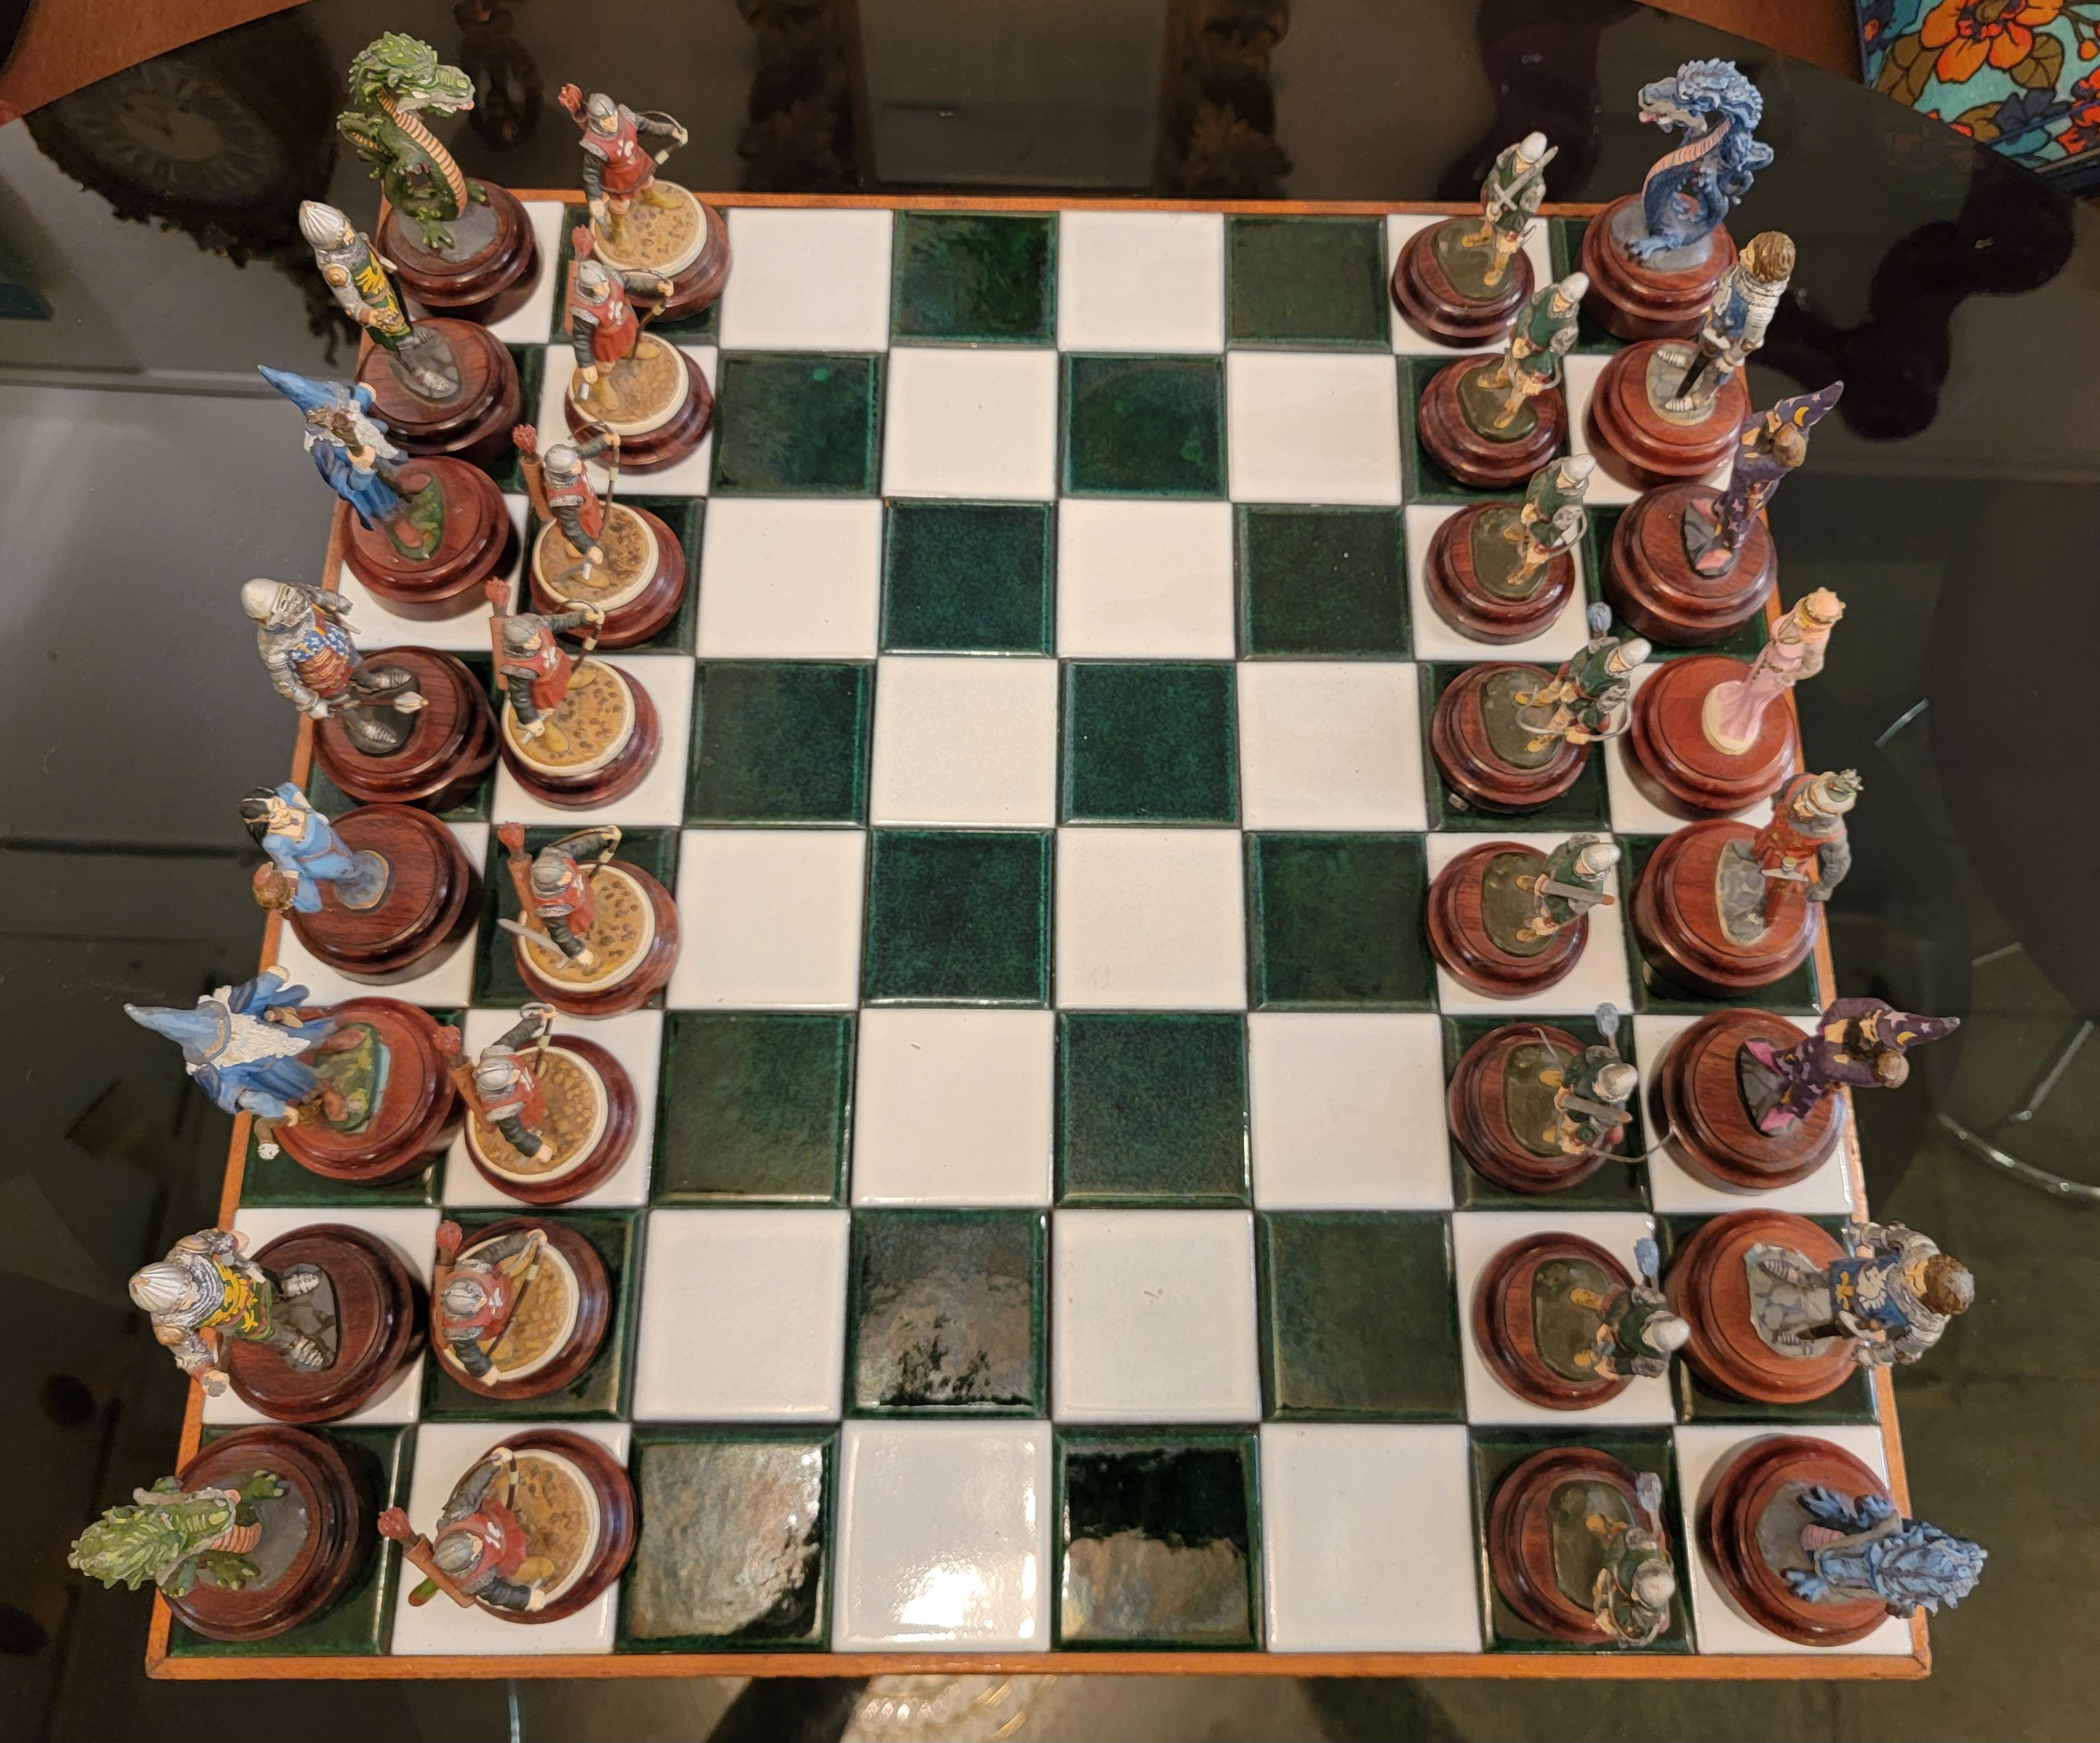 Tiled Mid Century and Wood Chess Board with Chess Figurines. Green and White tiles throughout. Each chess piece is placed above a wooden stand. Each piece is hand painted. There are 2 missing arrows that go to the back of the blue pawns. Paint is